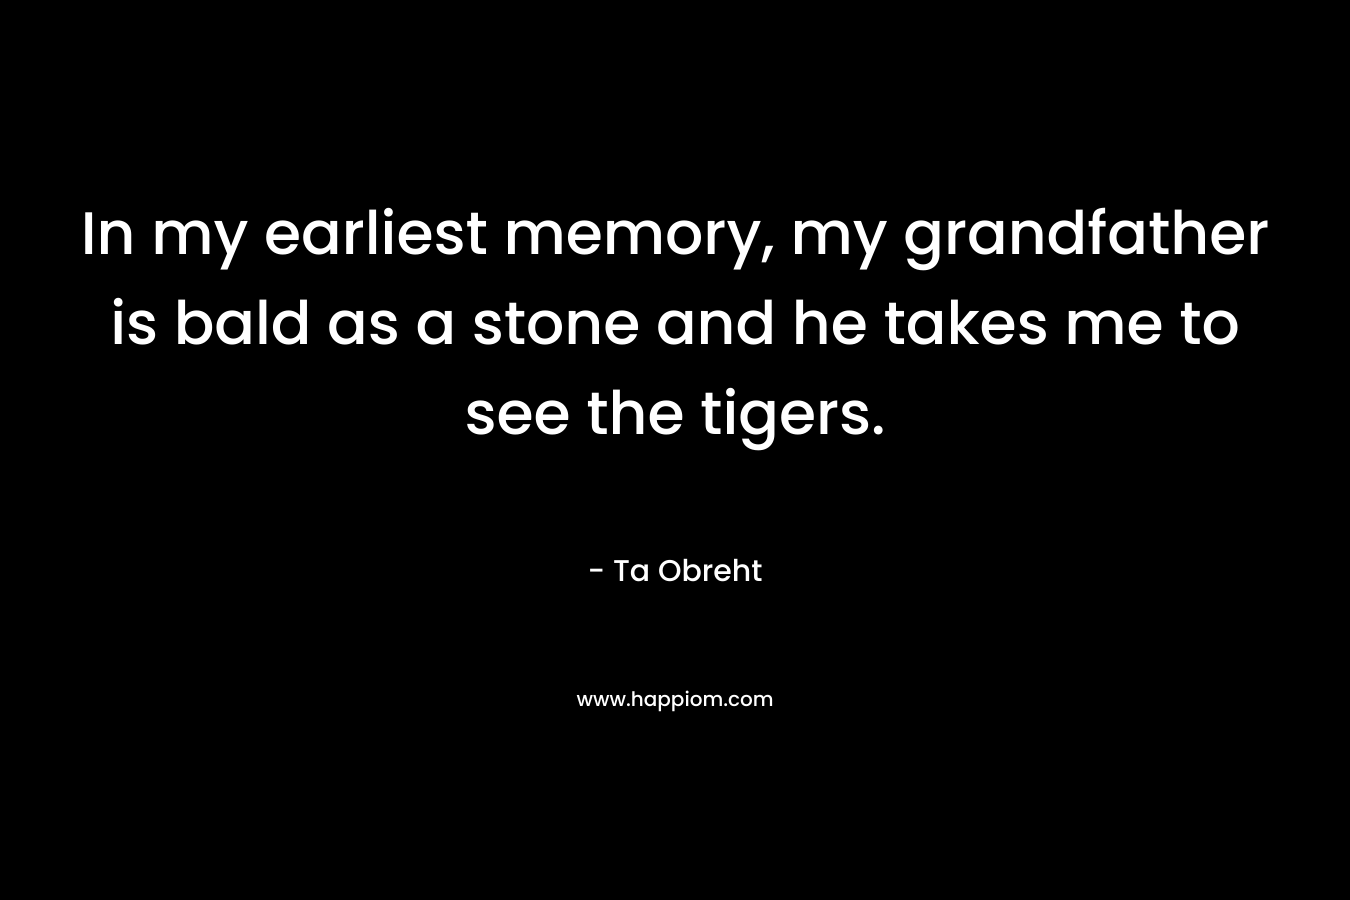 In my earliest memory, my grandfather is bald as a stone and he takes me to see the tigers.